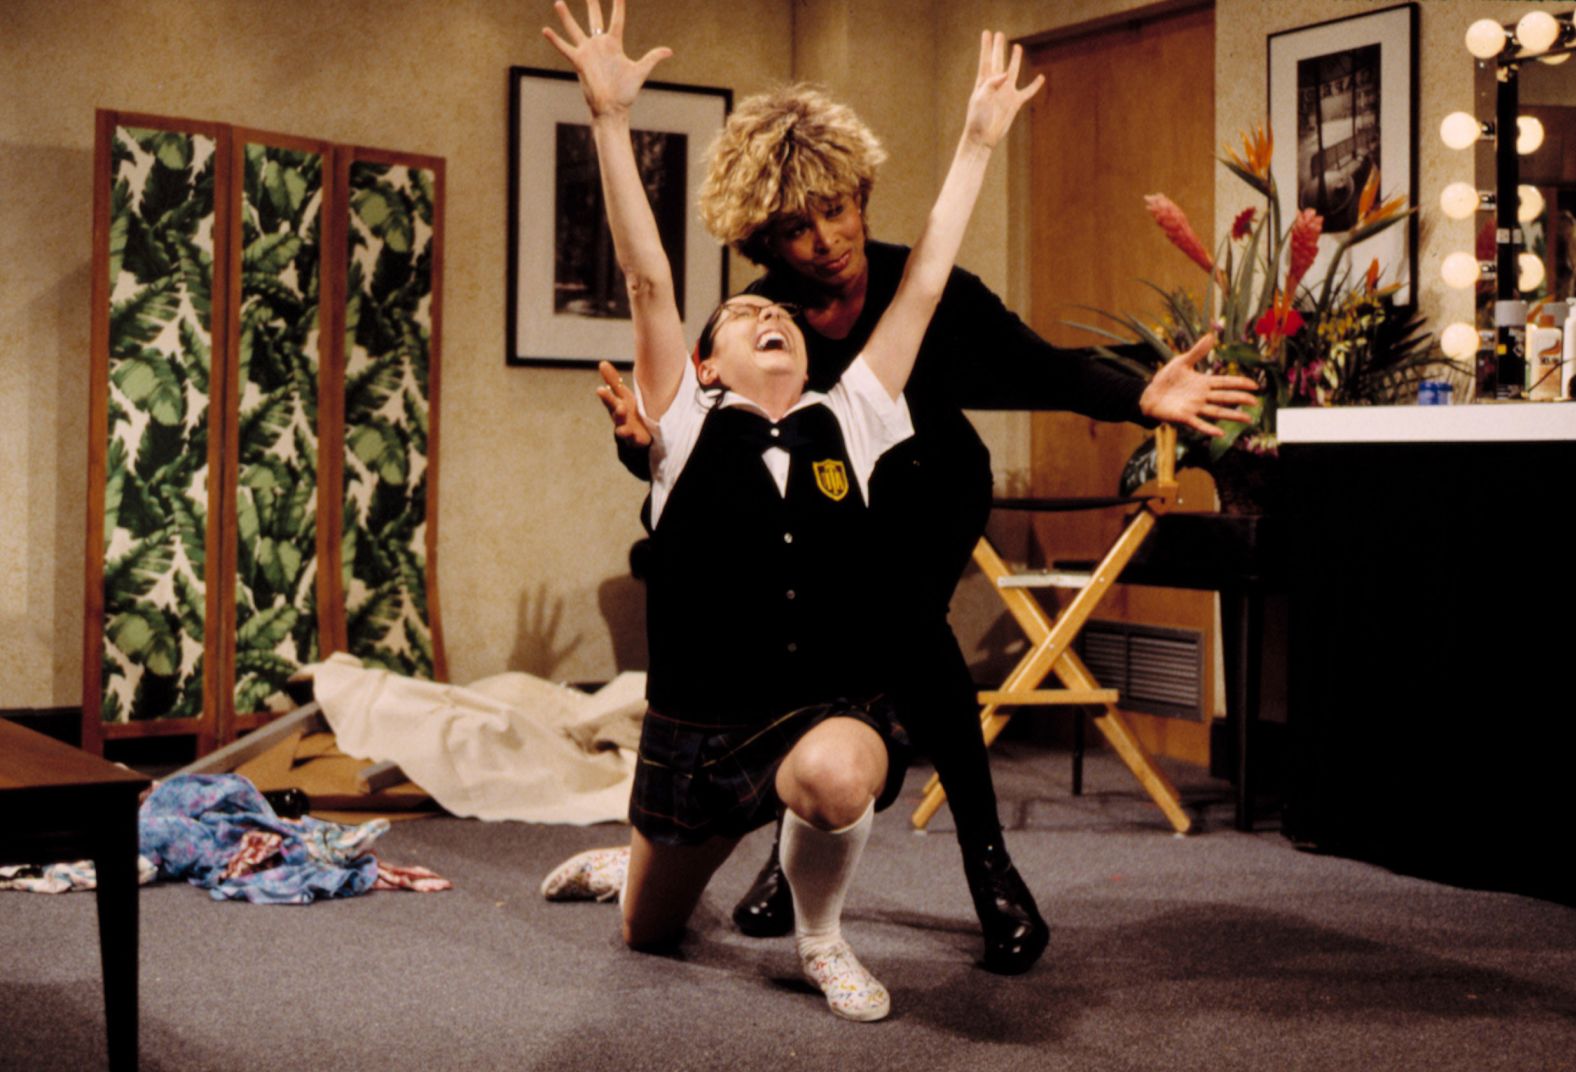 Turner appears in a skit with Molly Shannon during an episode of "Saturday Night Live" in 1997.